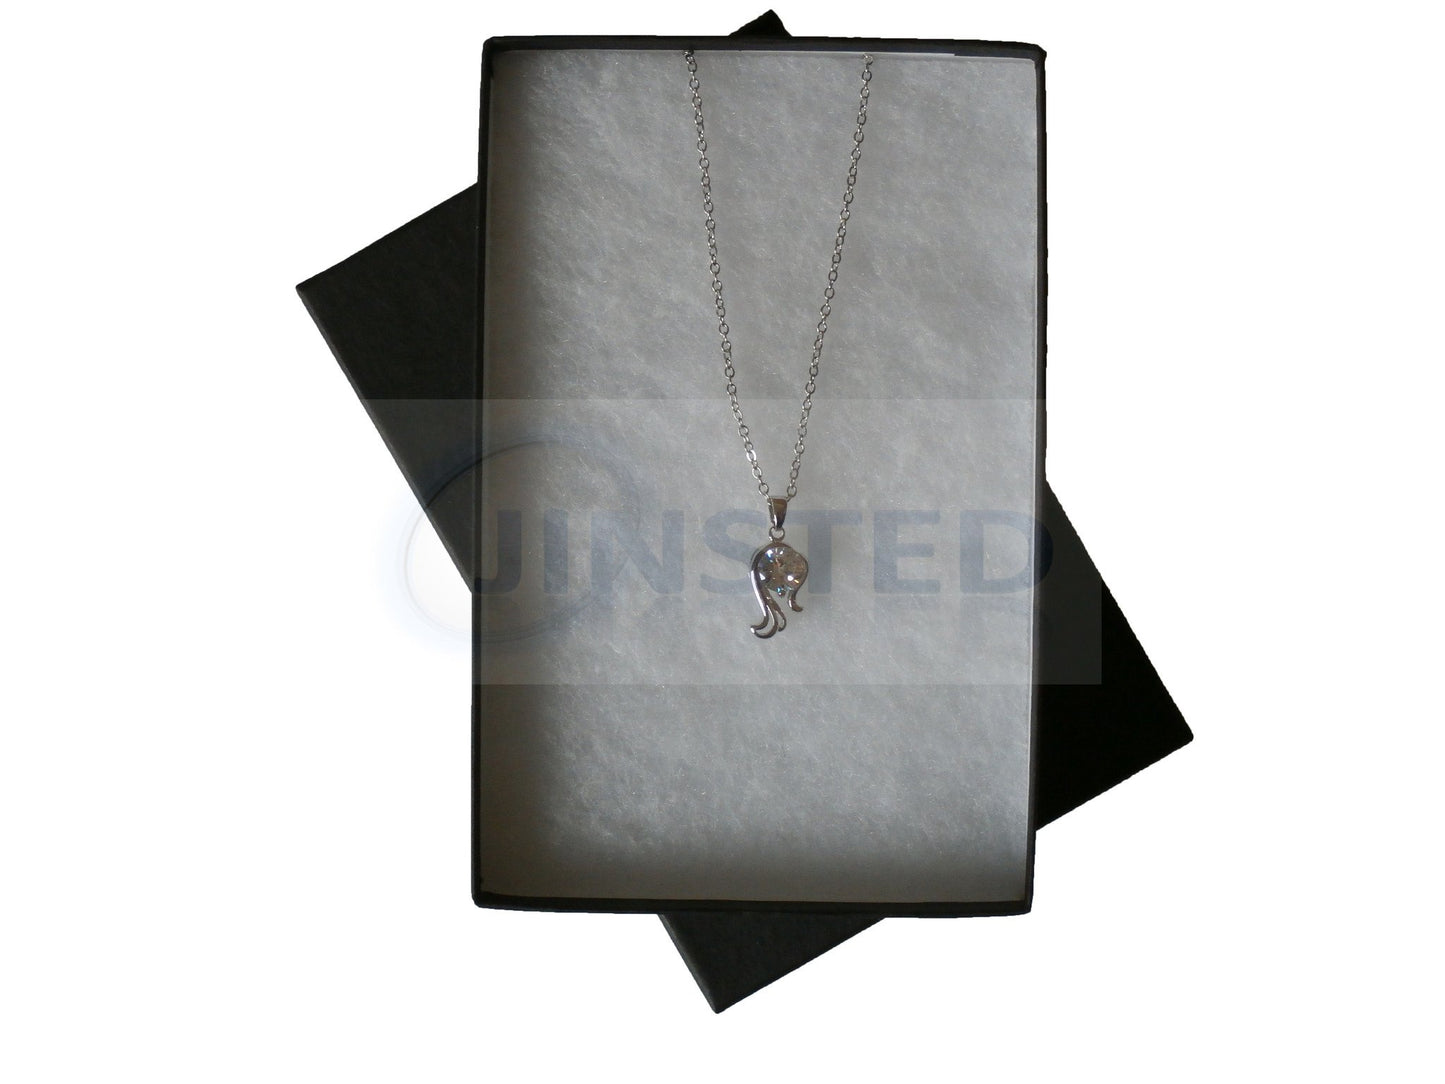 Ladies Jewellery, Silver Necklace with Seahorse Pendant with White Gem, Jinsted